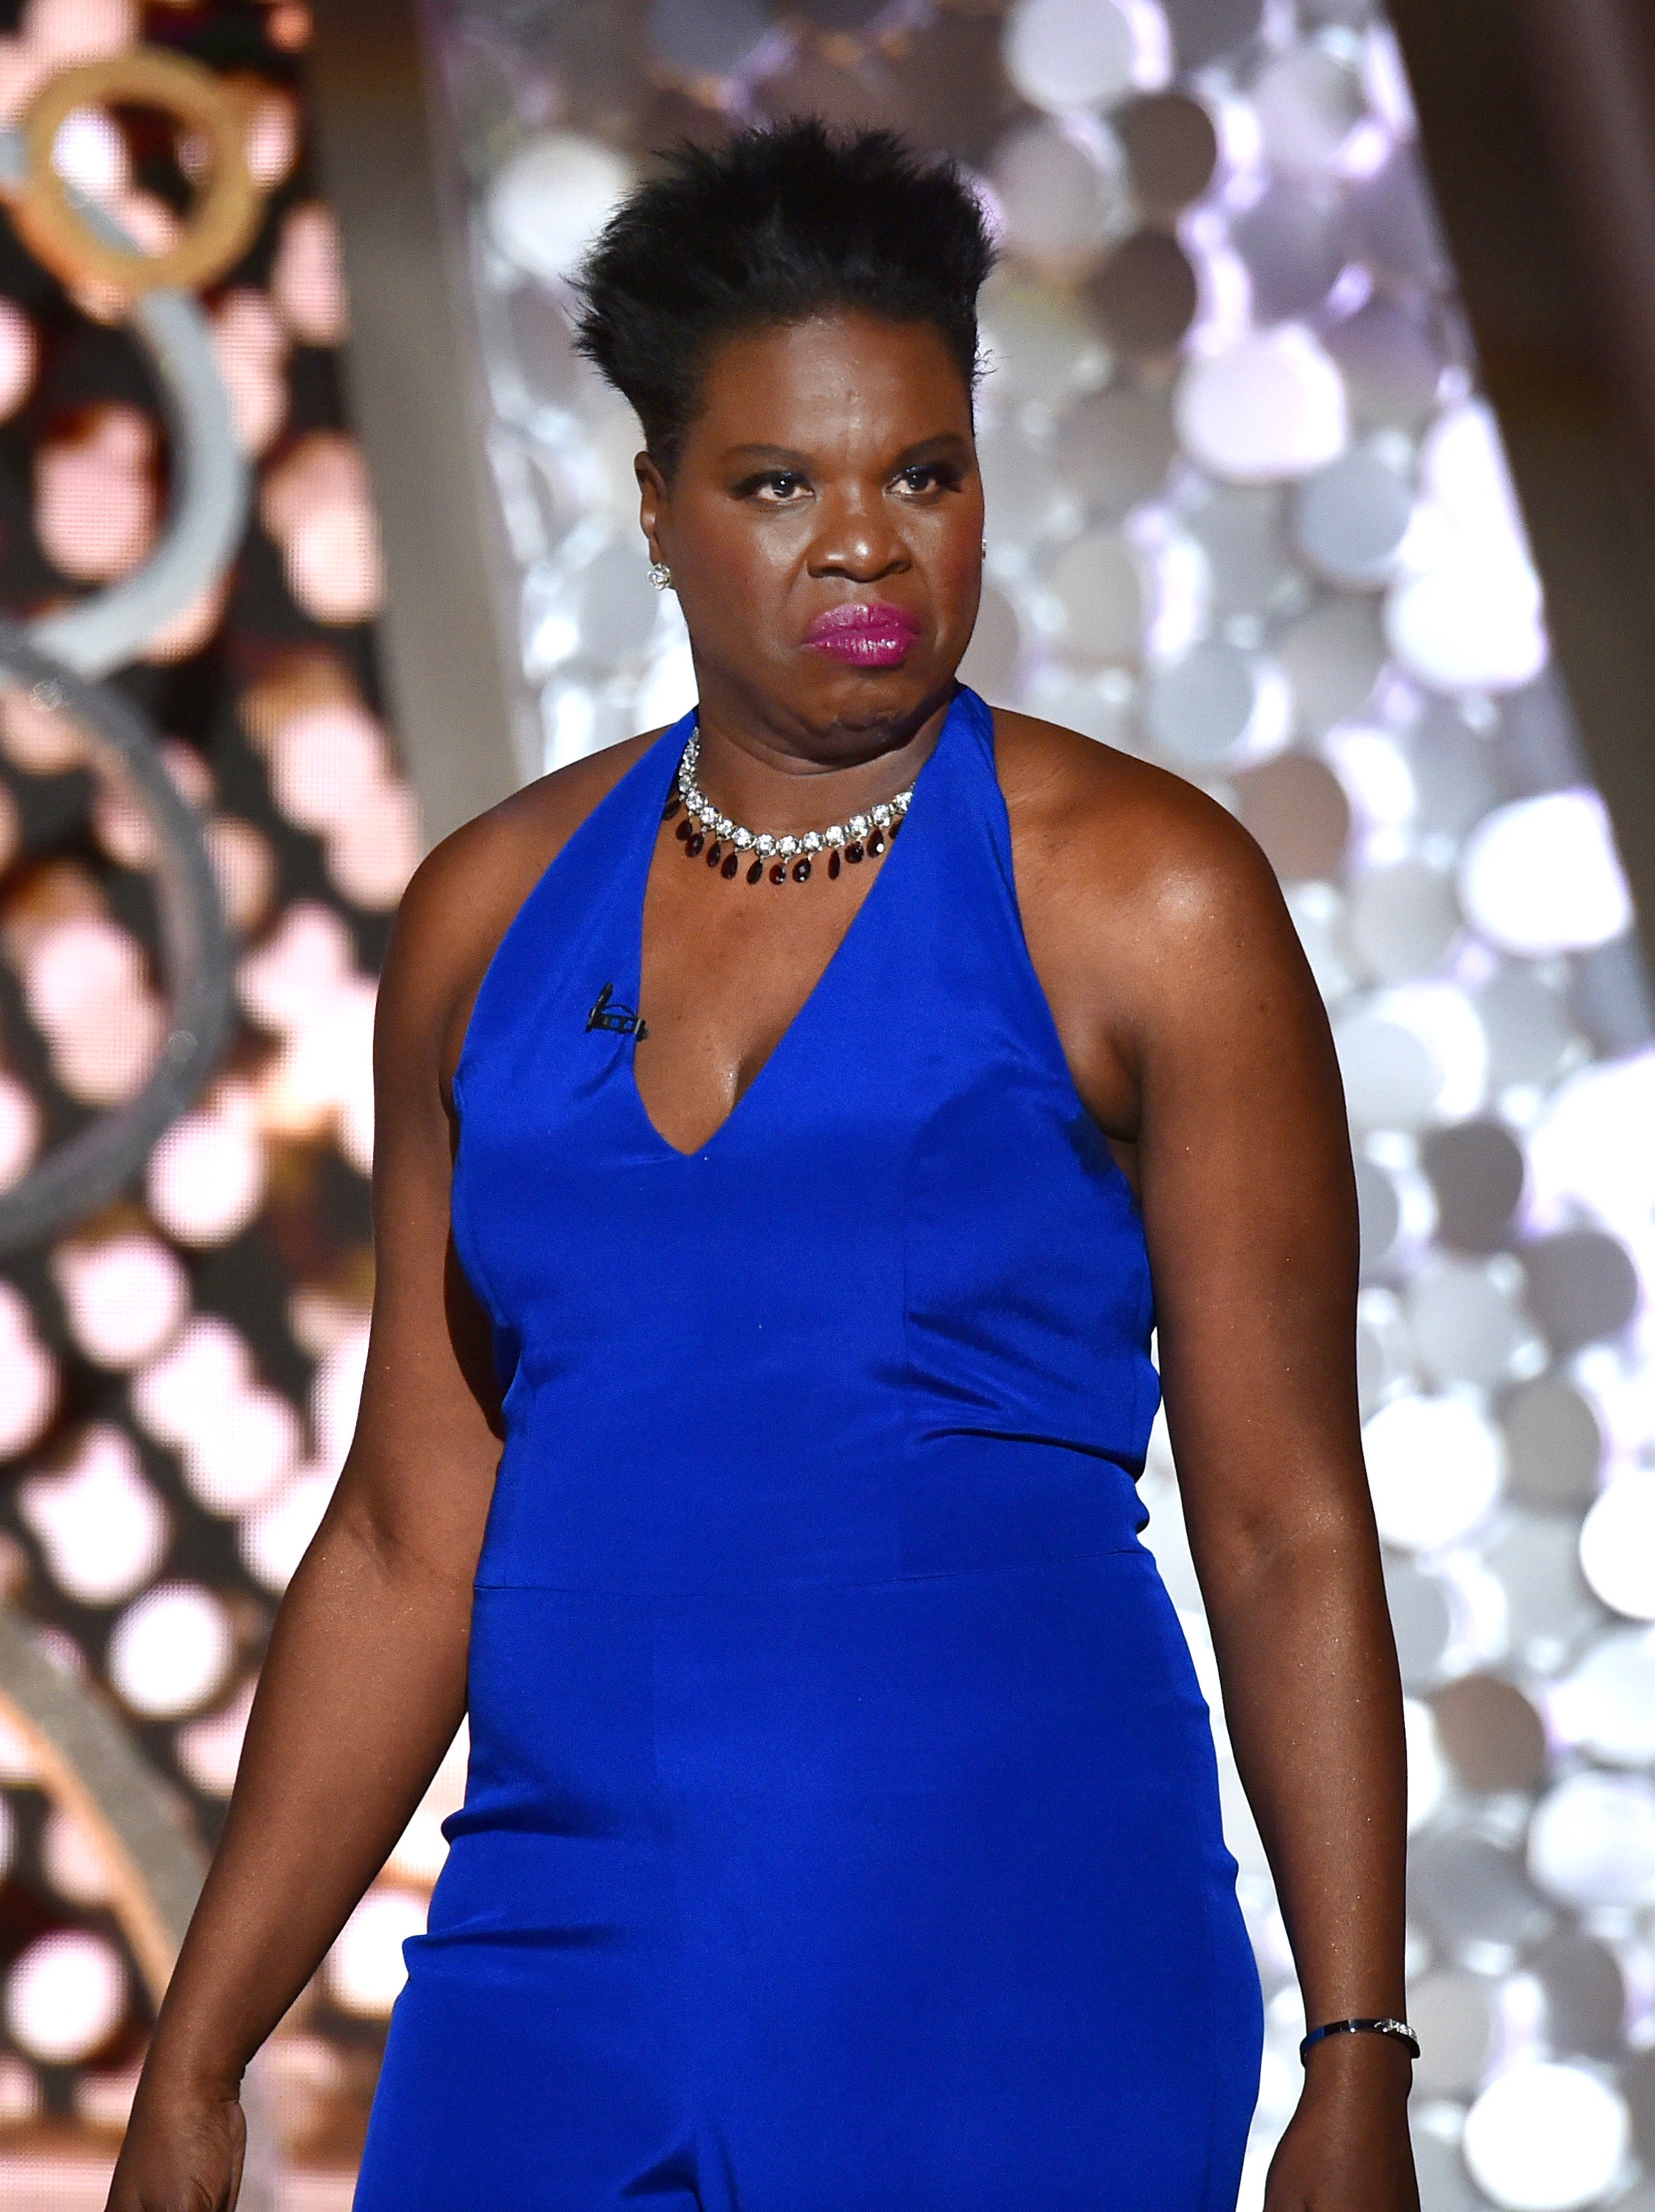 Leslie Jones Hits Back At Online Hackers In Hilarious But Real Emmys Appearance
